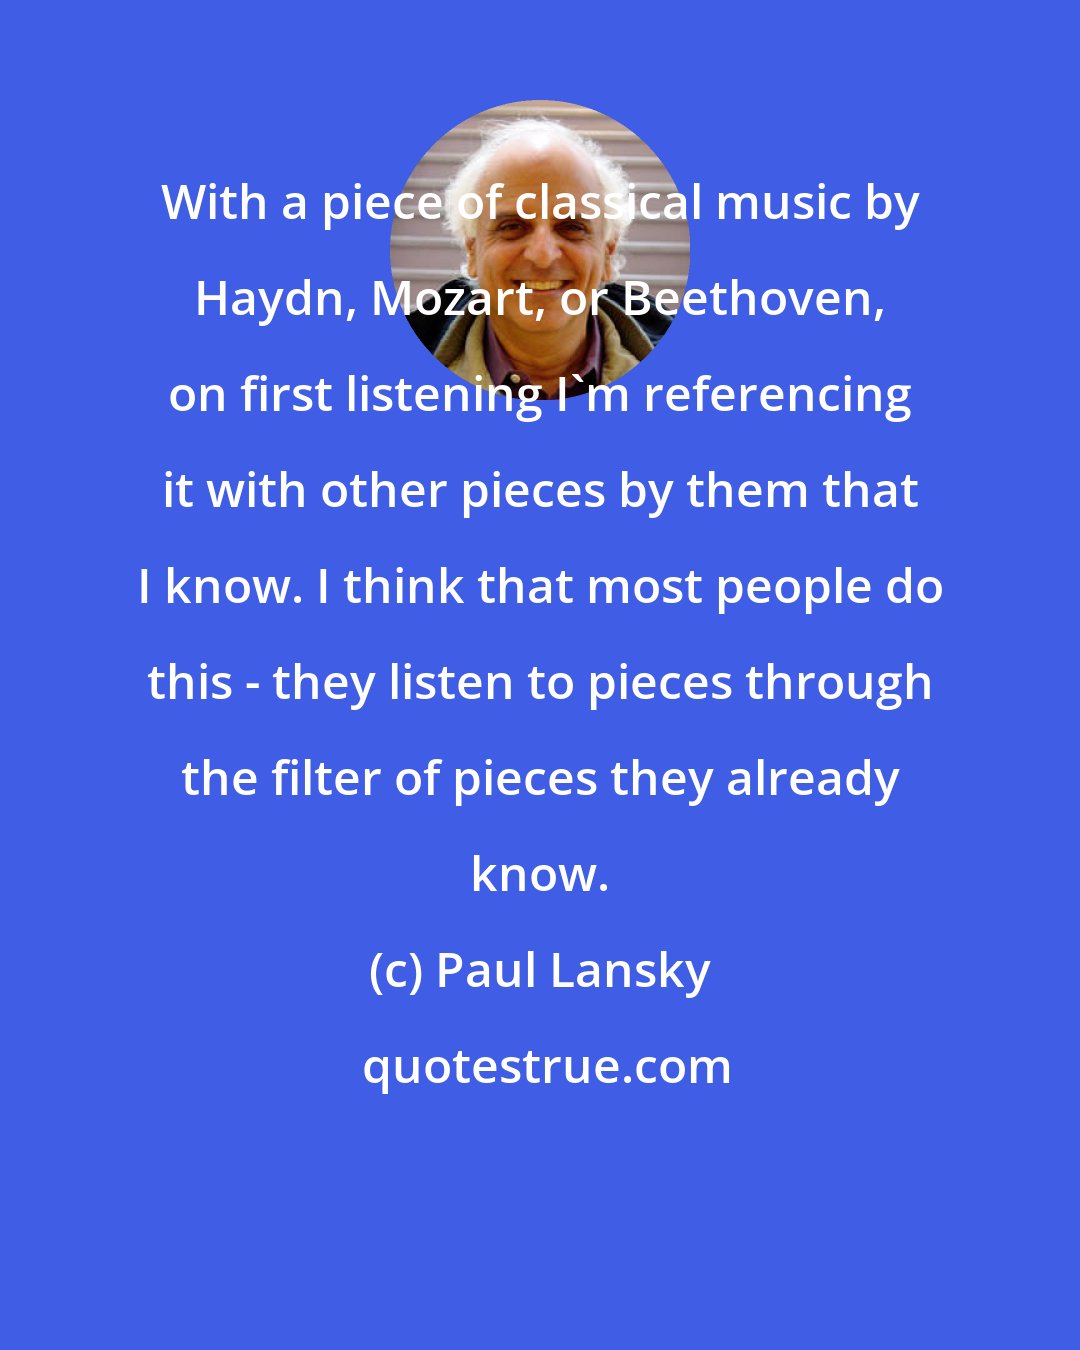 Paul Lansky: With a piece of classical music by Haydn, Mozart, or Beethoven, on first listening I'm referencing it with other pieces by them that I know. I think that most people do this - they listen to pieces through the filter of pieces they already know.